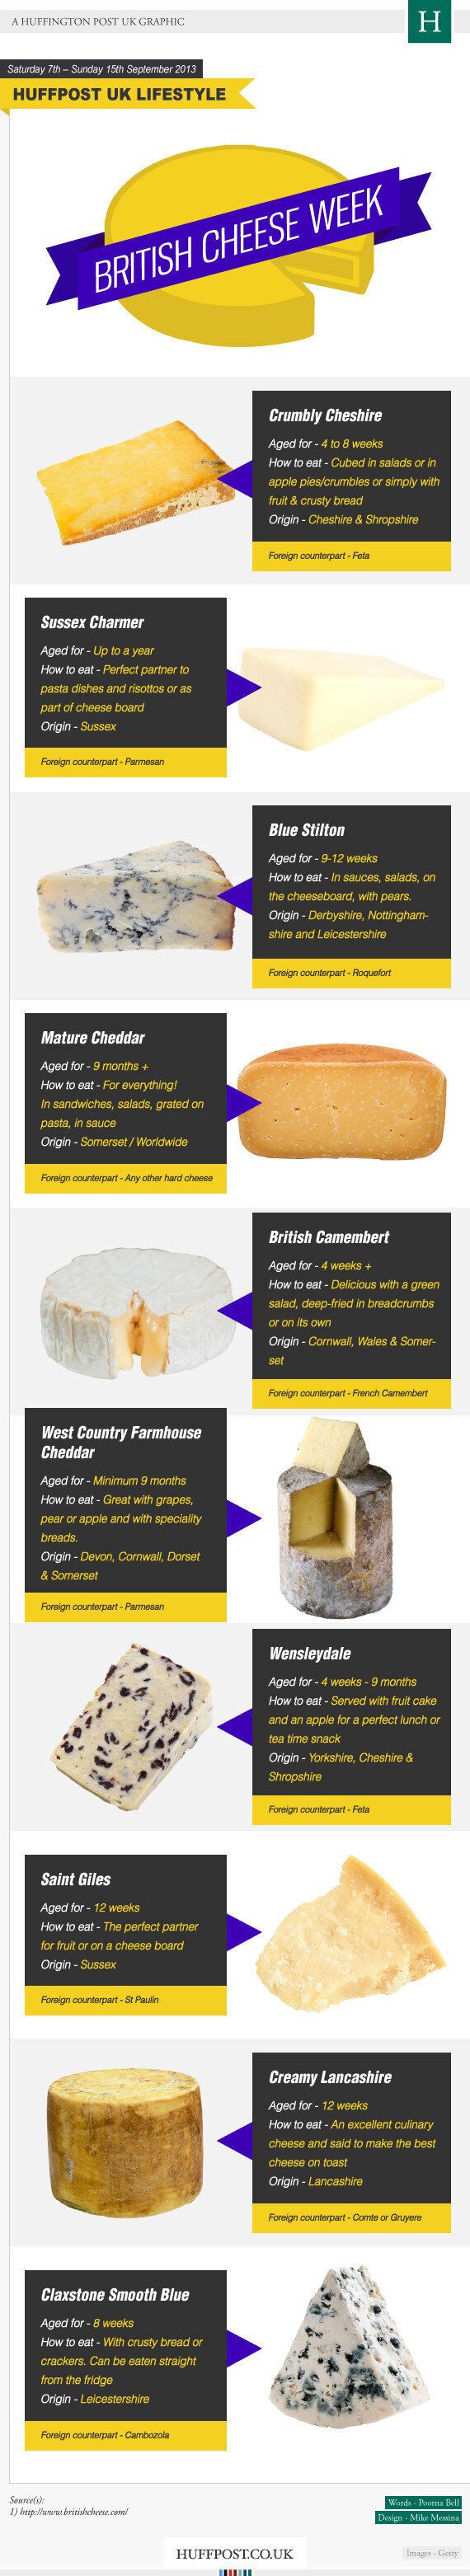 Best British Cheeses Explained, Including Recipes And Their Foreign